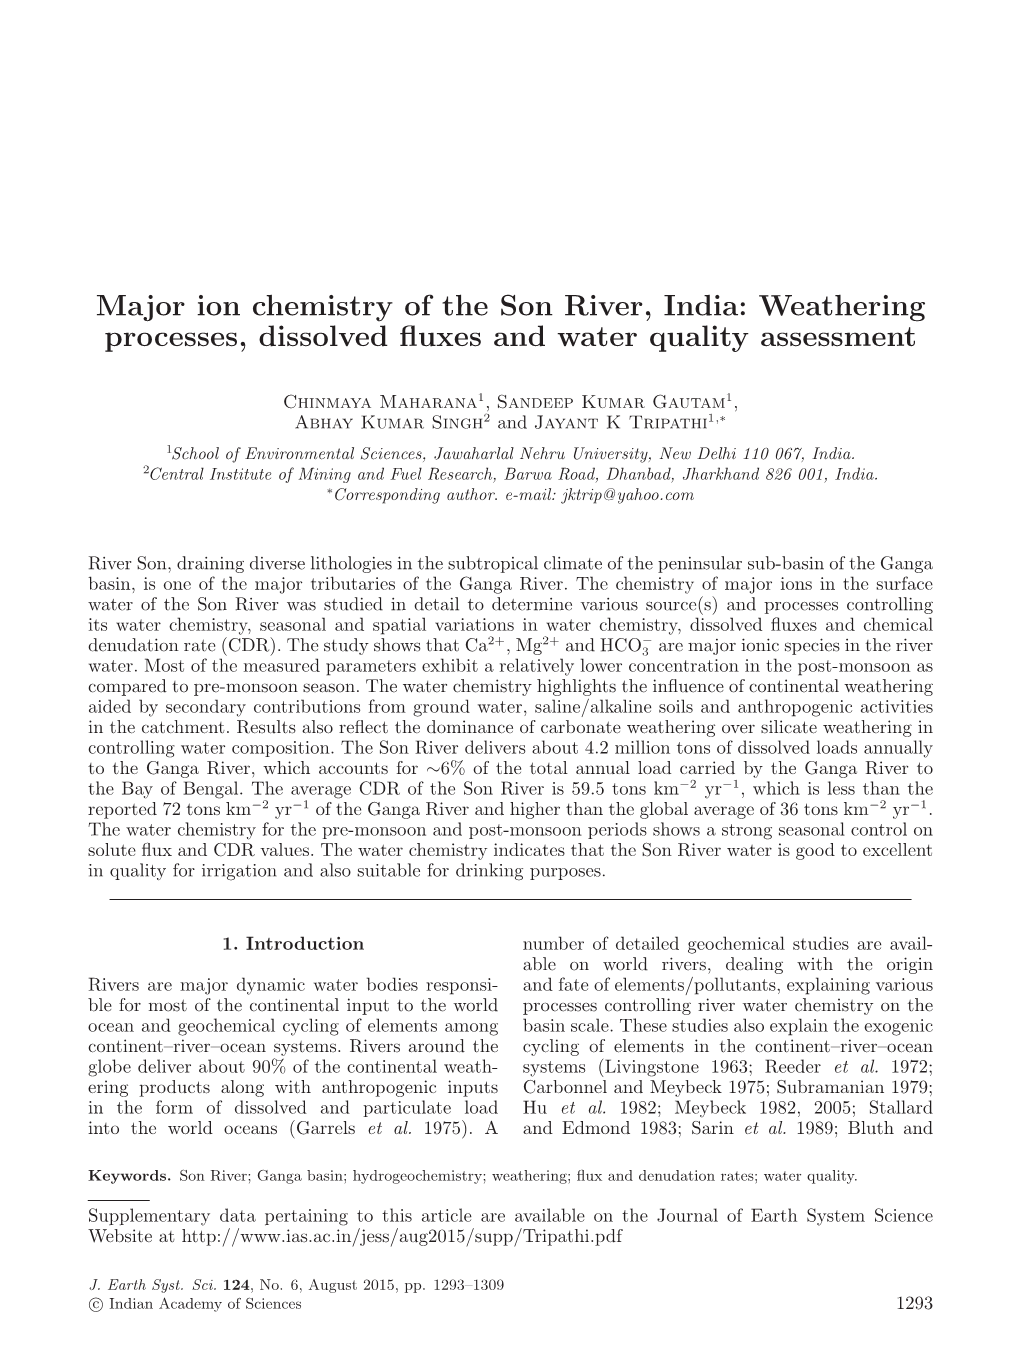 Major Ion Chemistry of the Son River, India: Weathering Processes, Dissolved ﬂuxes and Water Quality Assessment